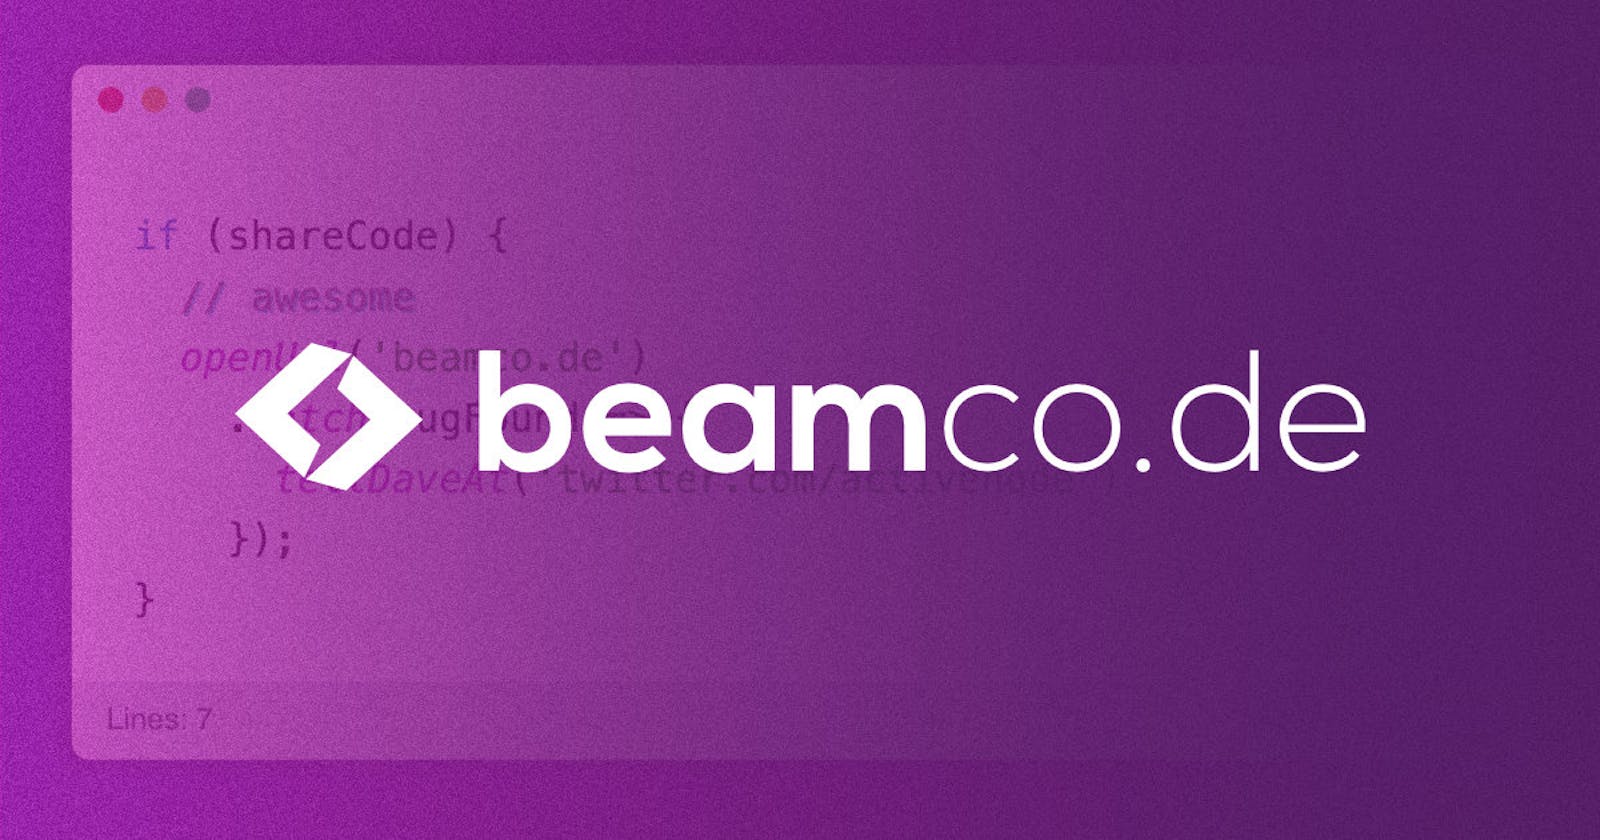 beamco.de: A new code snippet creator is in town 🌈